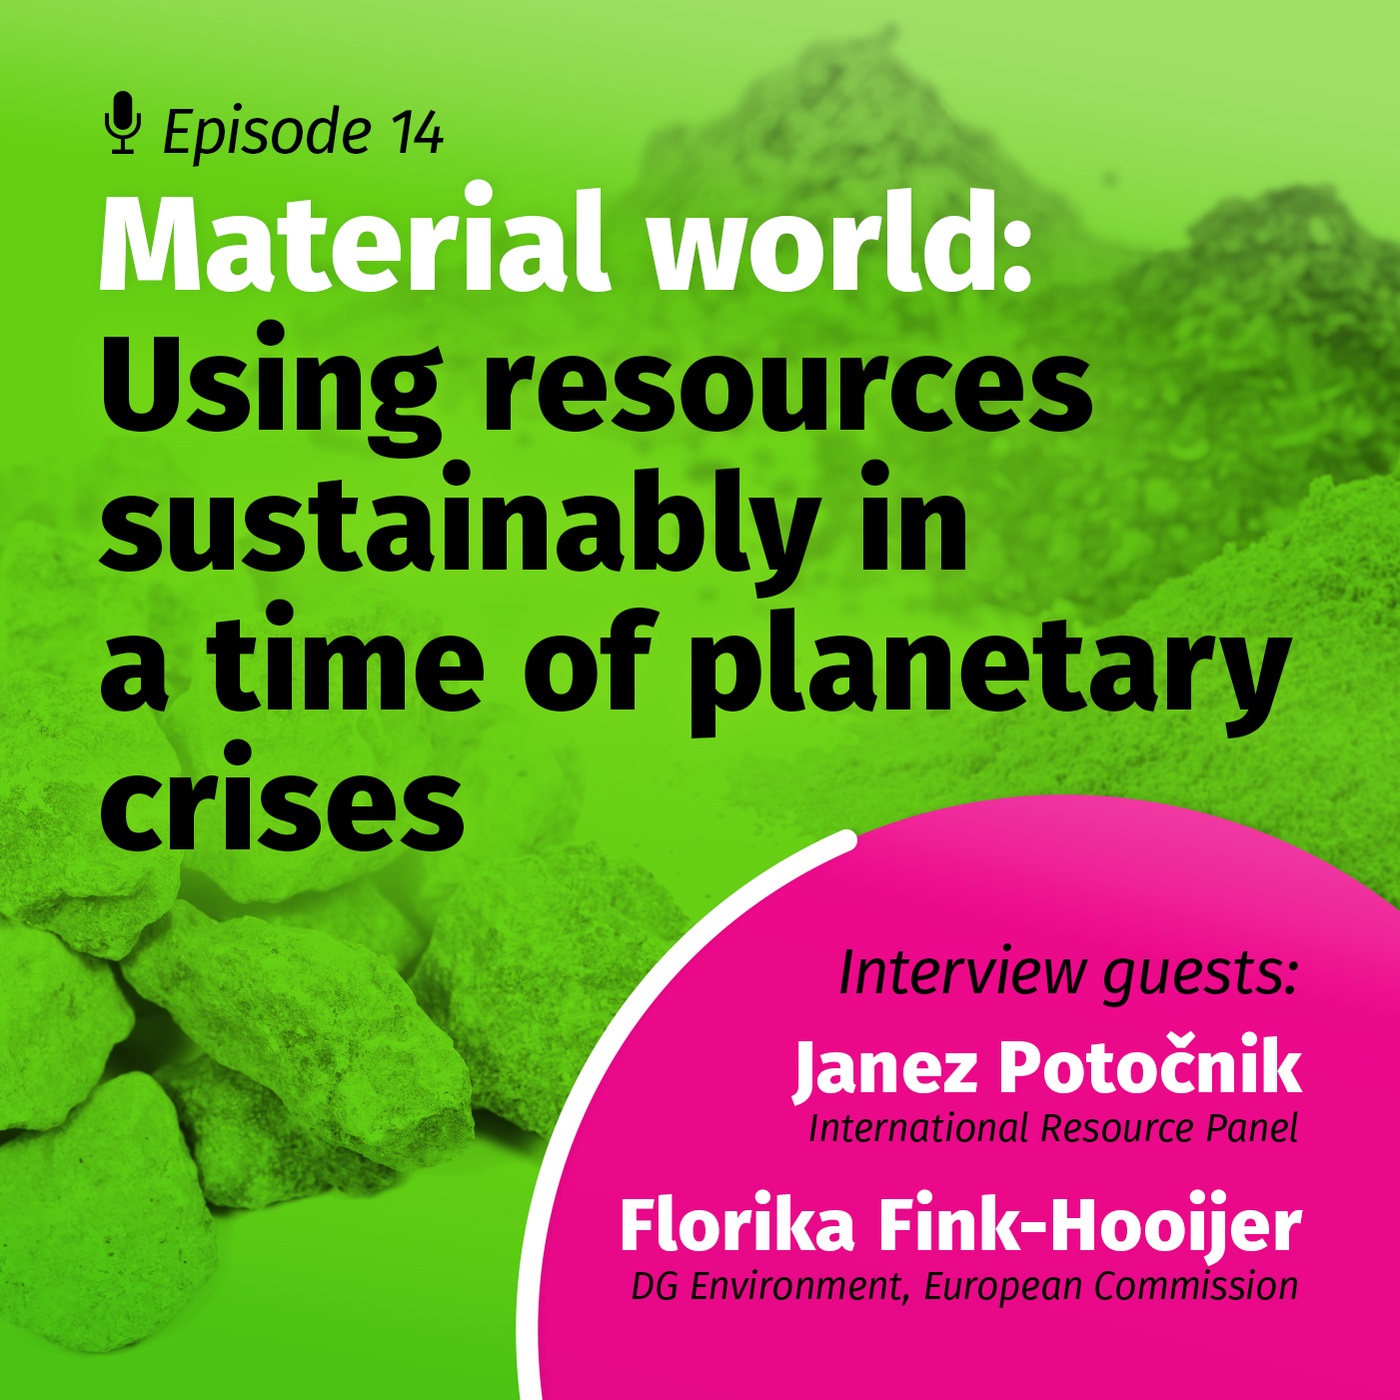 Material world: Using resources sustainably in a time of planetary crises